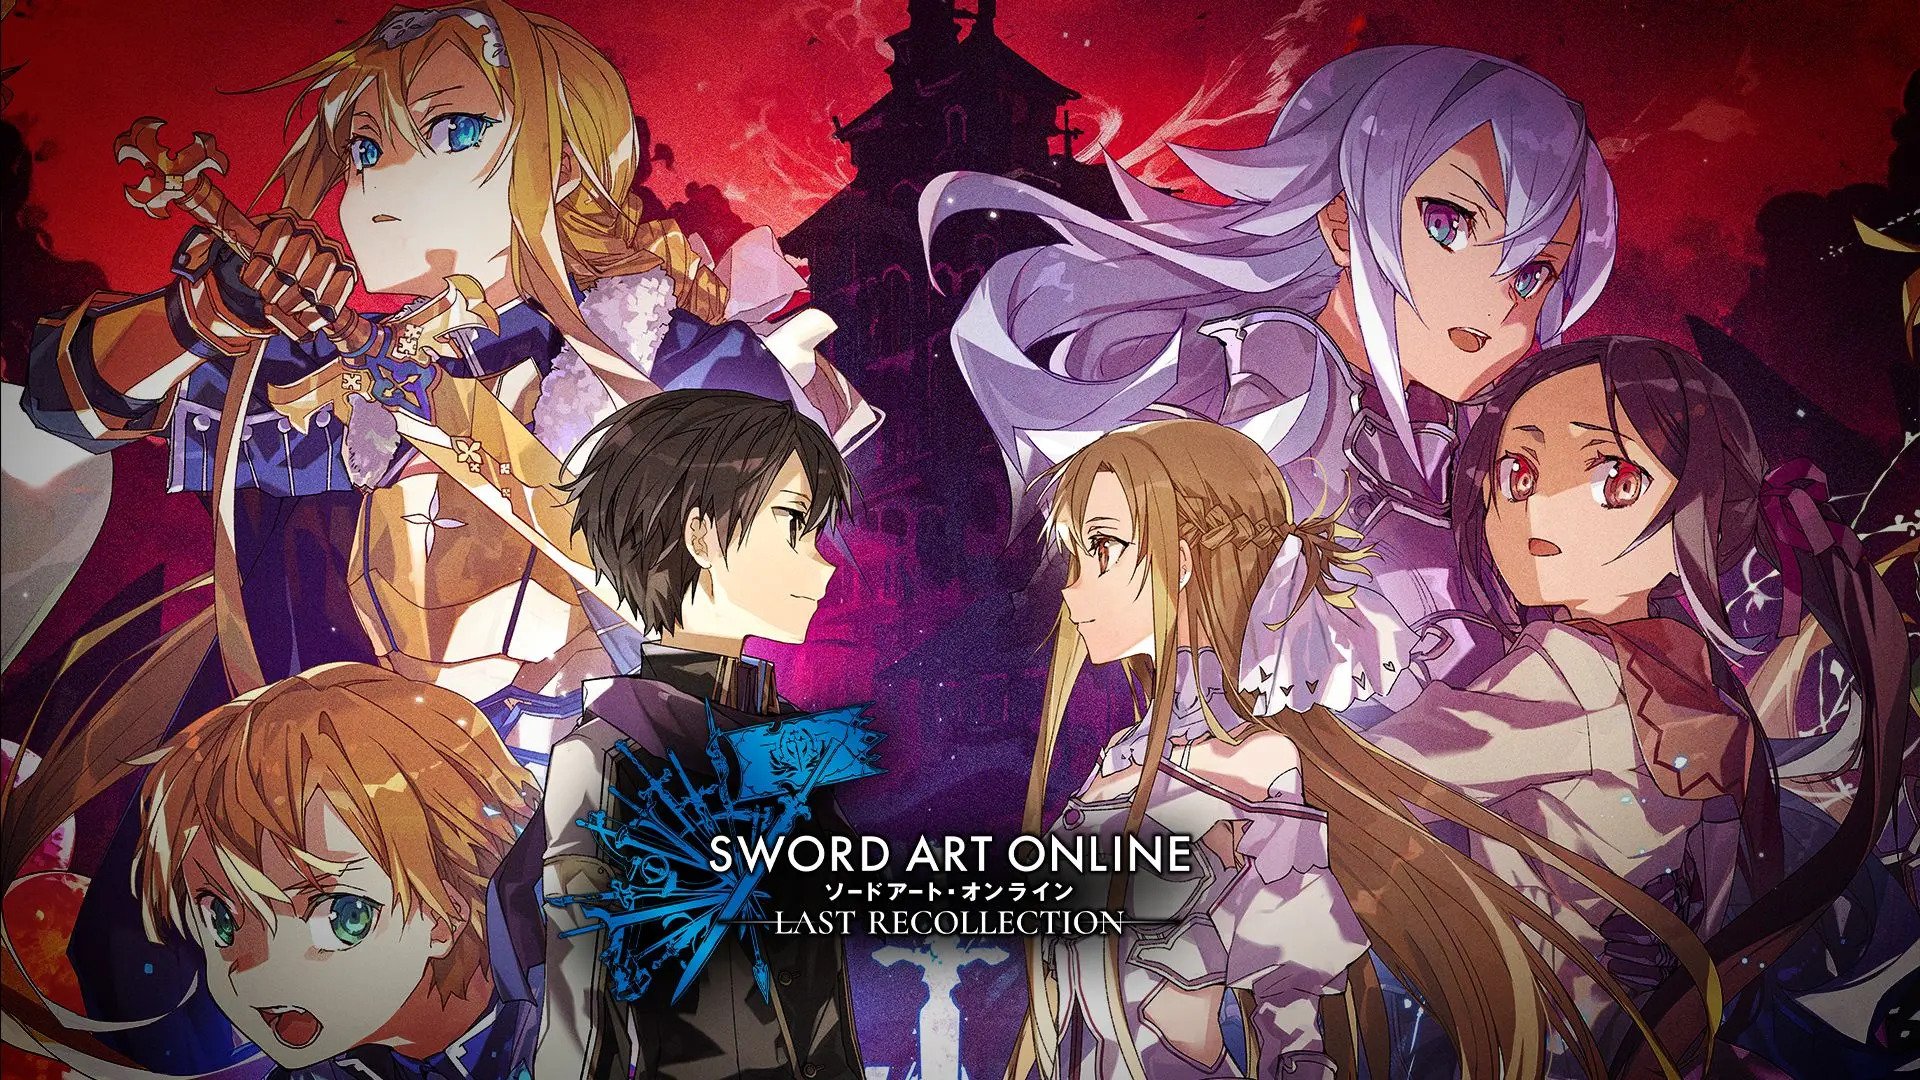 Ritual Of Bonds Vol.2 Now Available For Sword Art Online Last Recollection